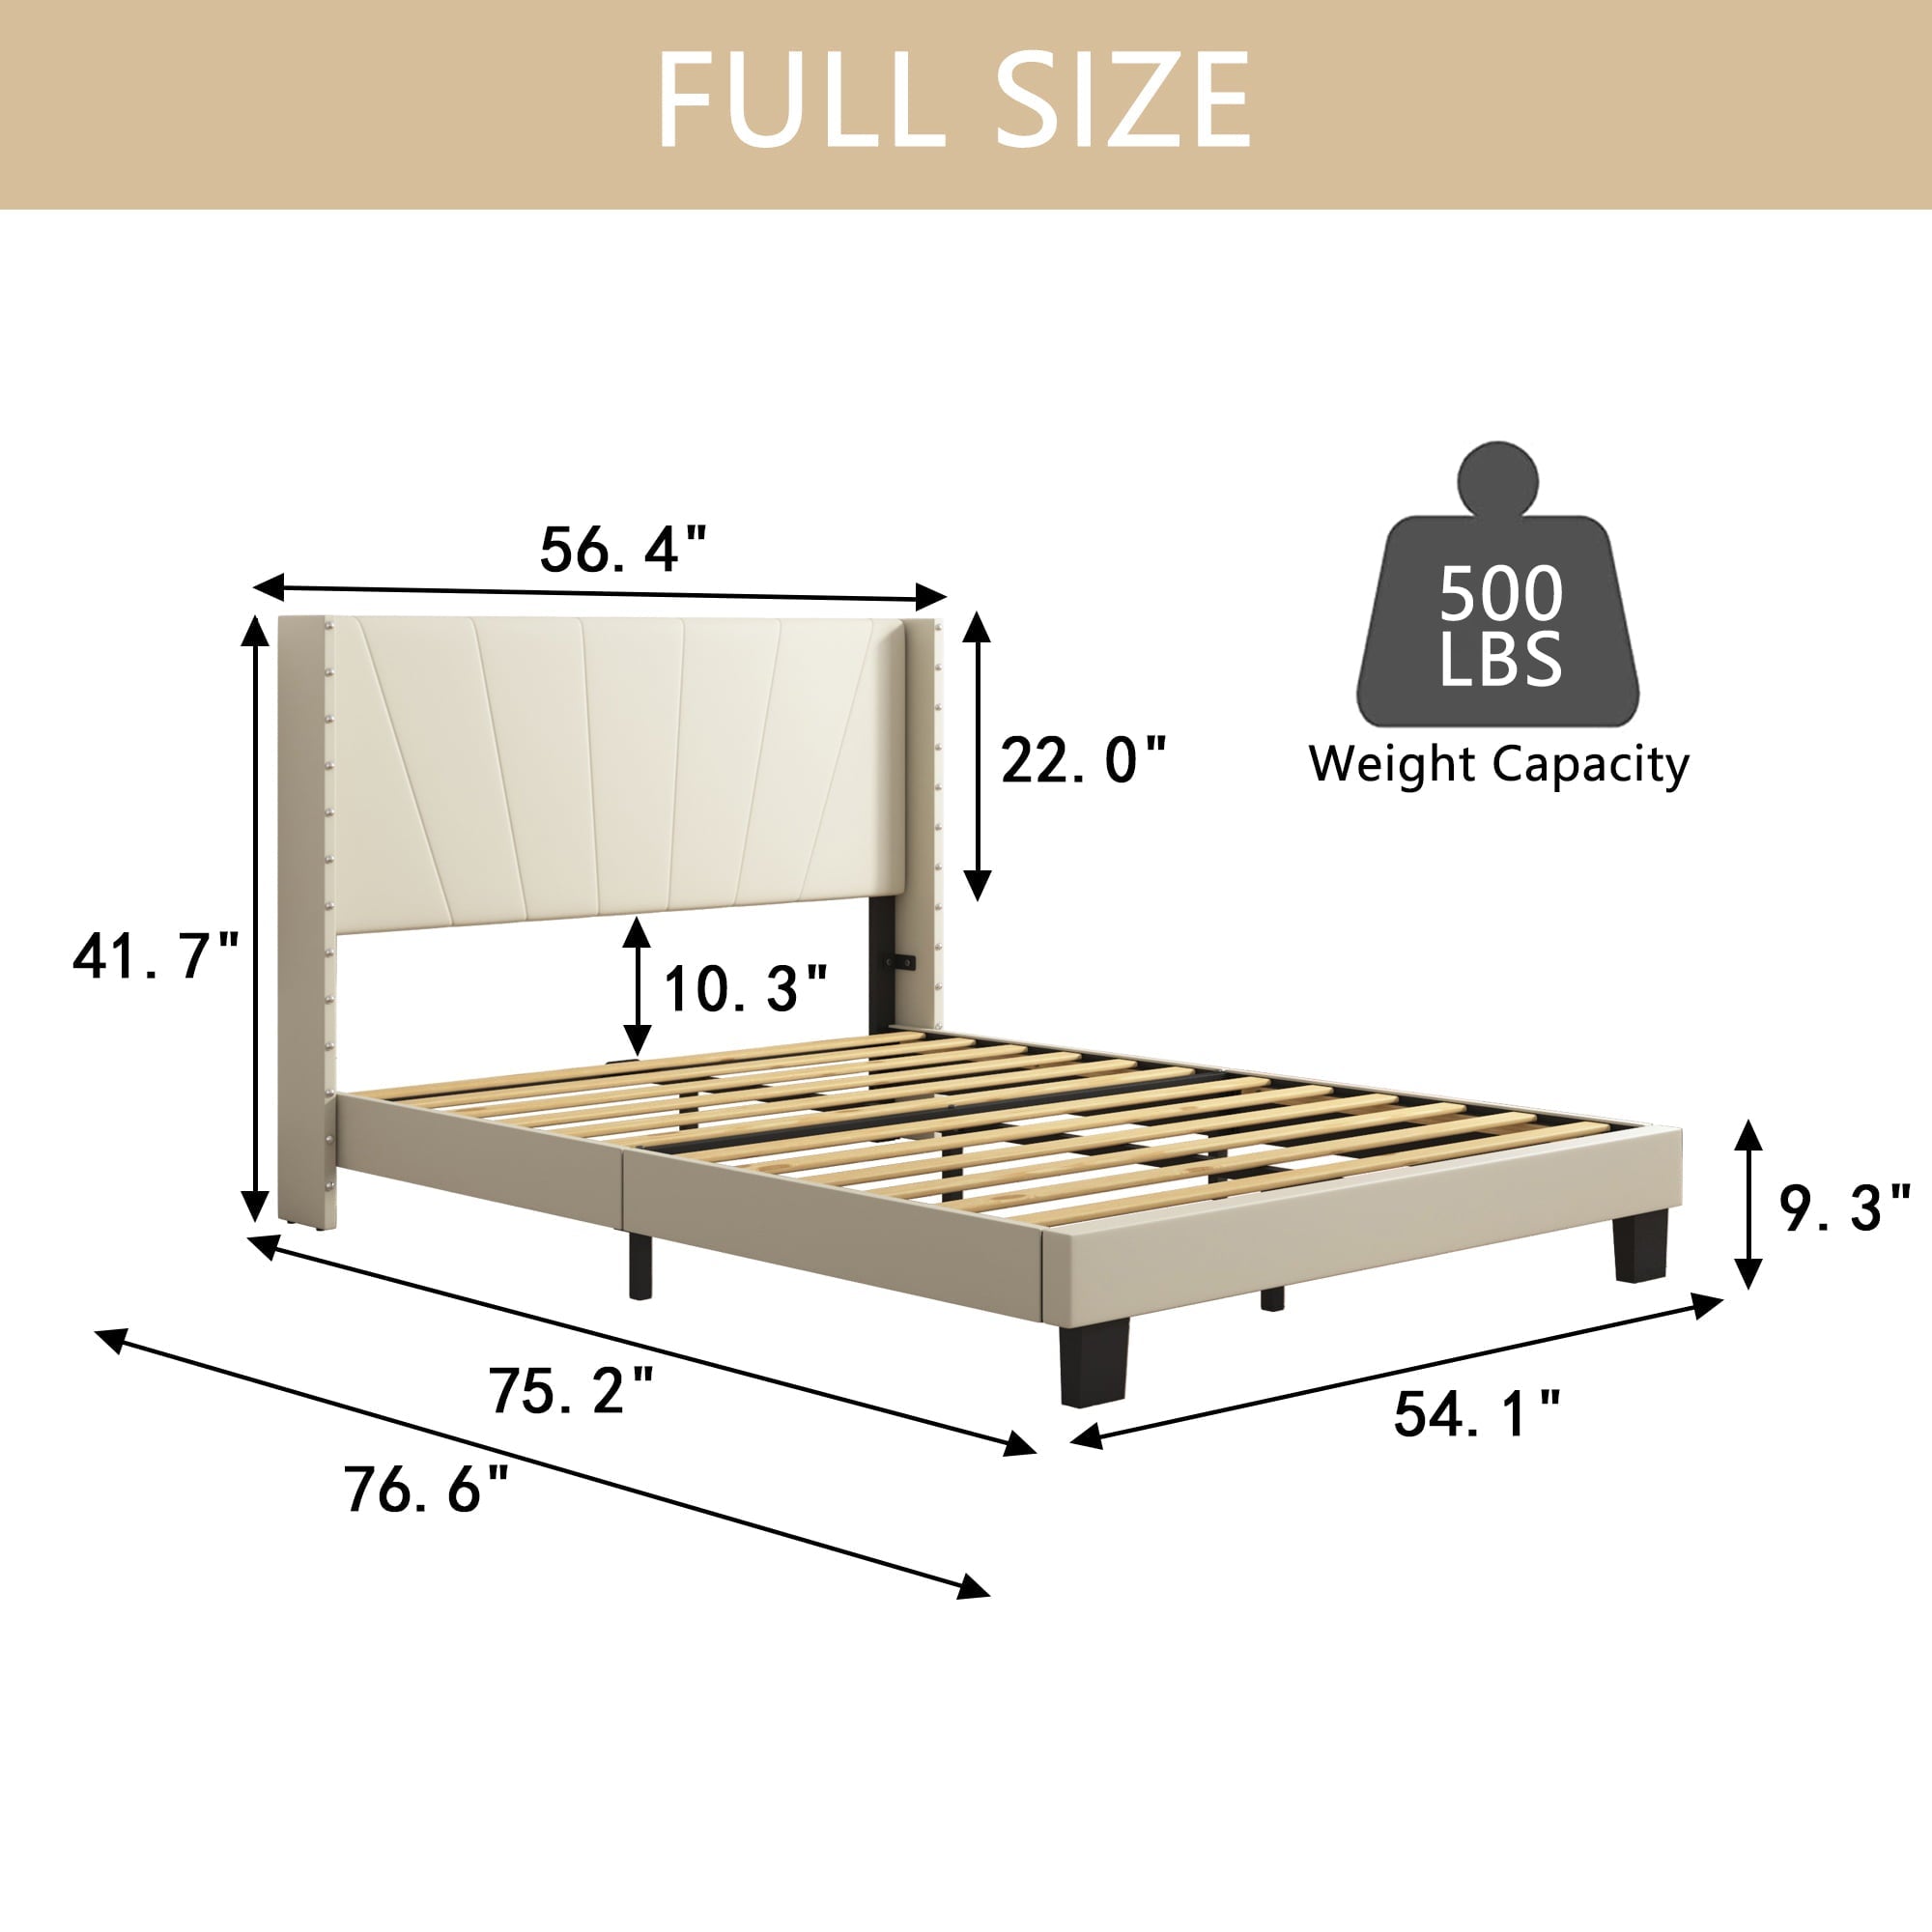 uhomepro Beige Full Bed Frame for Adults Kids, Modern Fabric Upholstered Platform Bed Frame with Headboard, Full Size Bed Frame Bedroom Furniture with Wood Slats Support, No Box Spring Needed